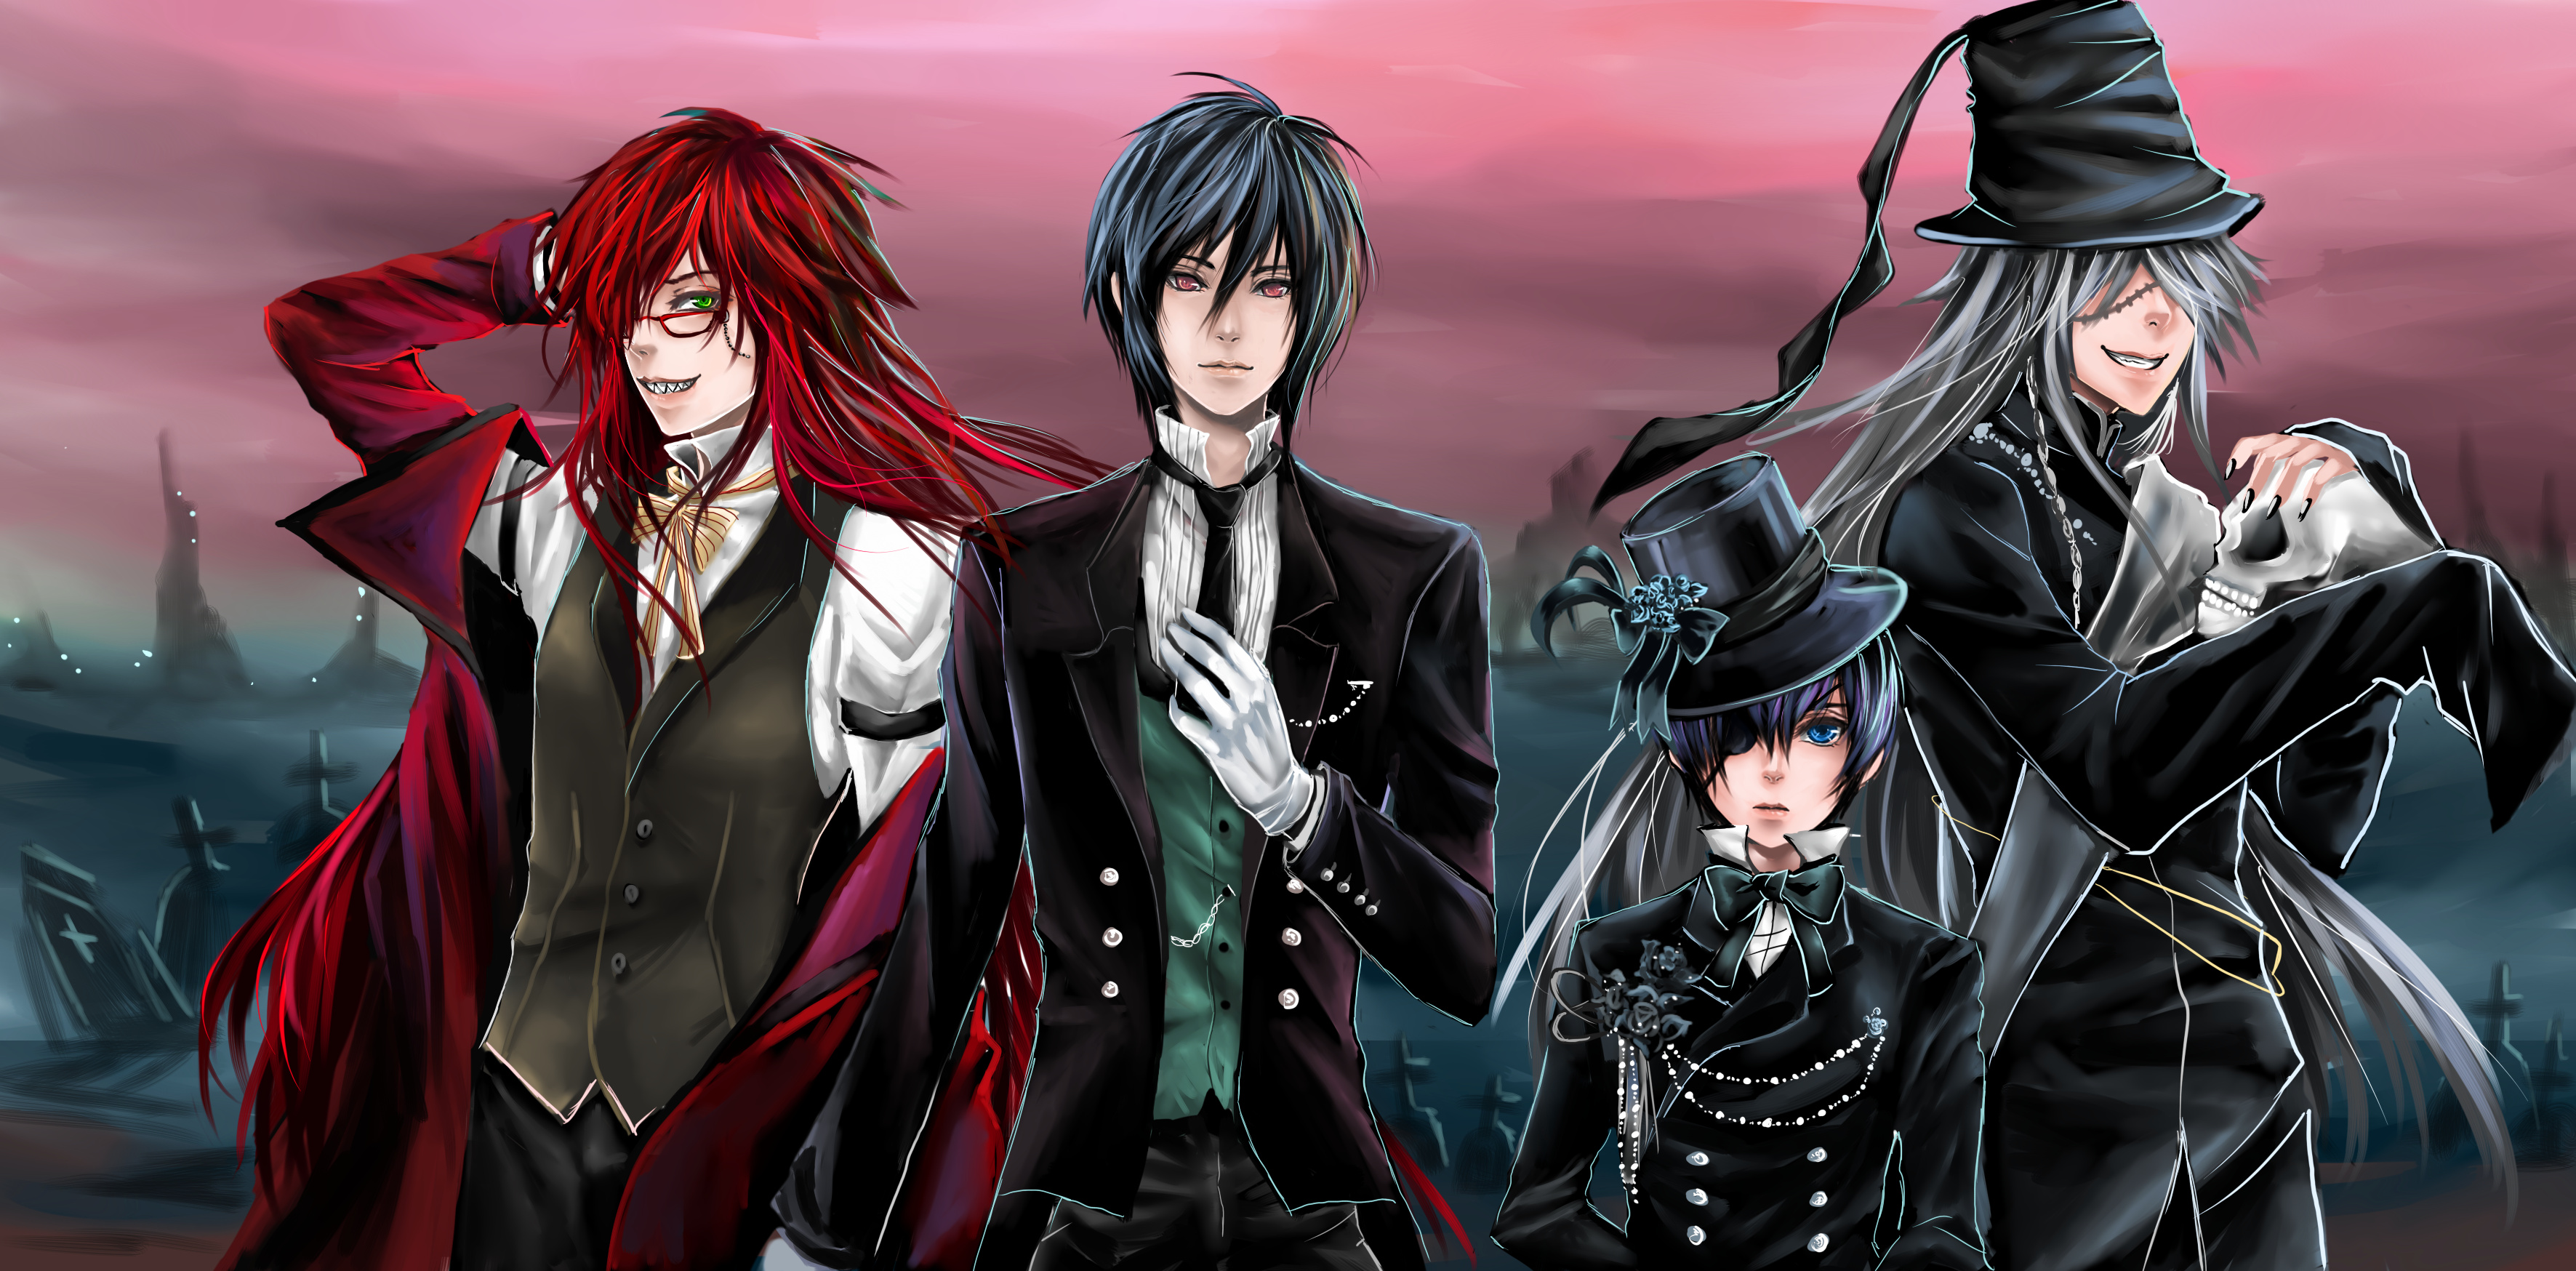 Grell Sutcliff: The series that follows Ciel Phantomhive, the twelve-year-old Earl of Phantomhive serving as the Queen's Watchdog. 3550x1750 Dual Screen Background.